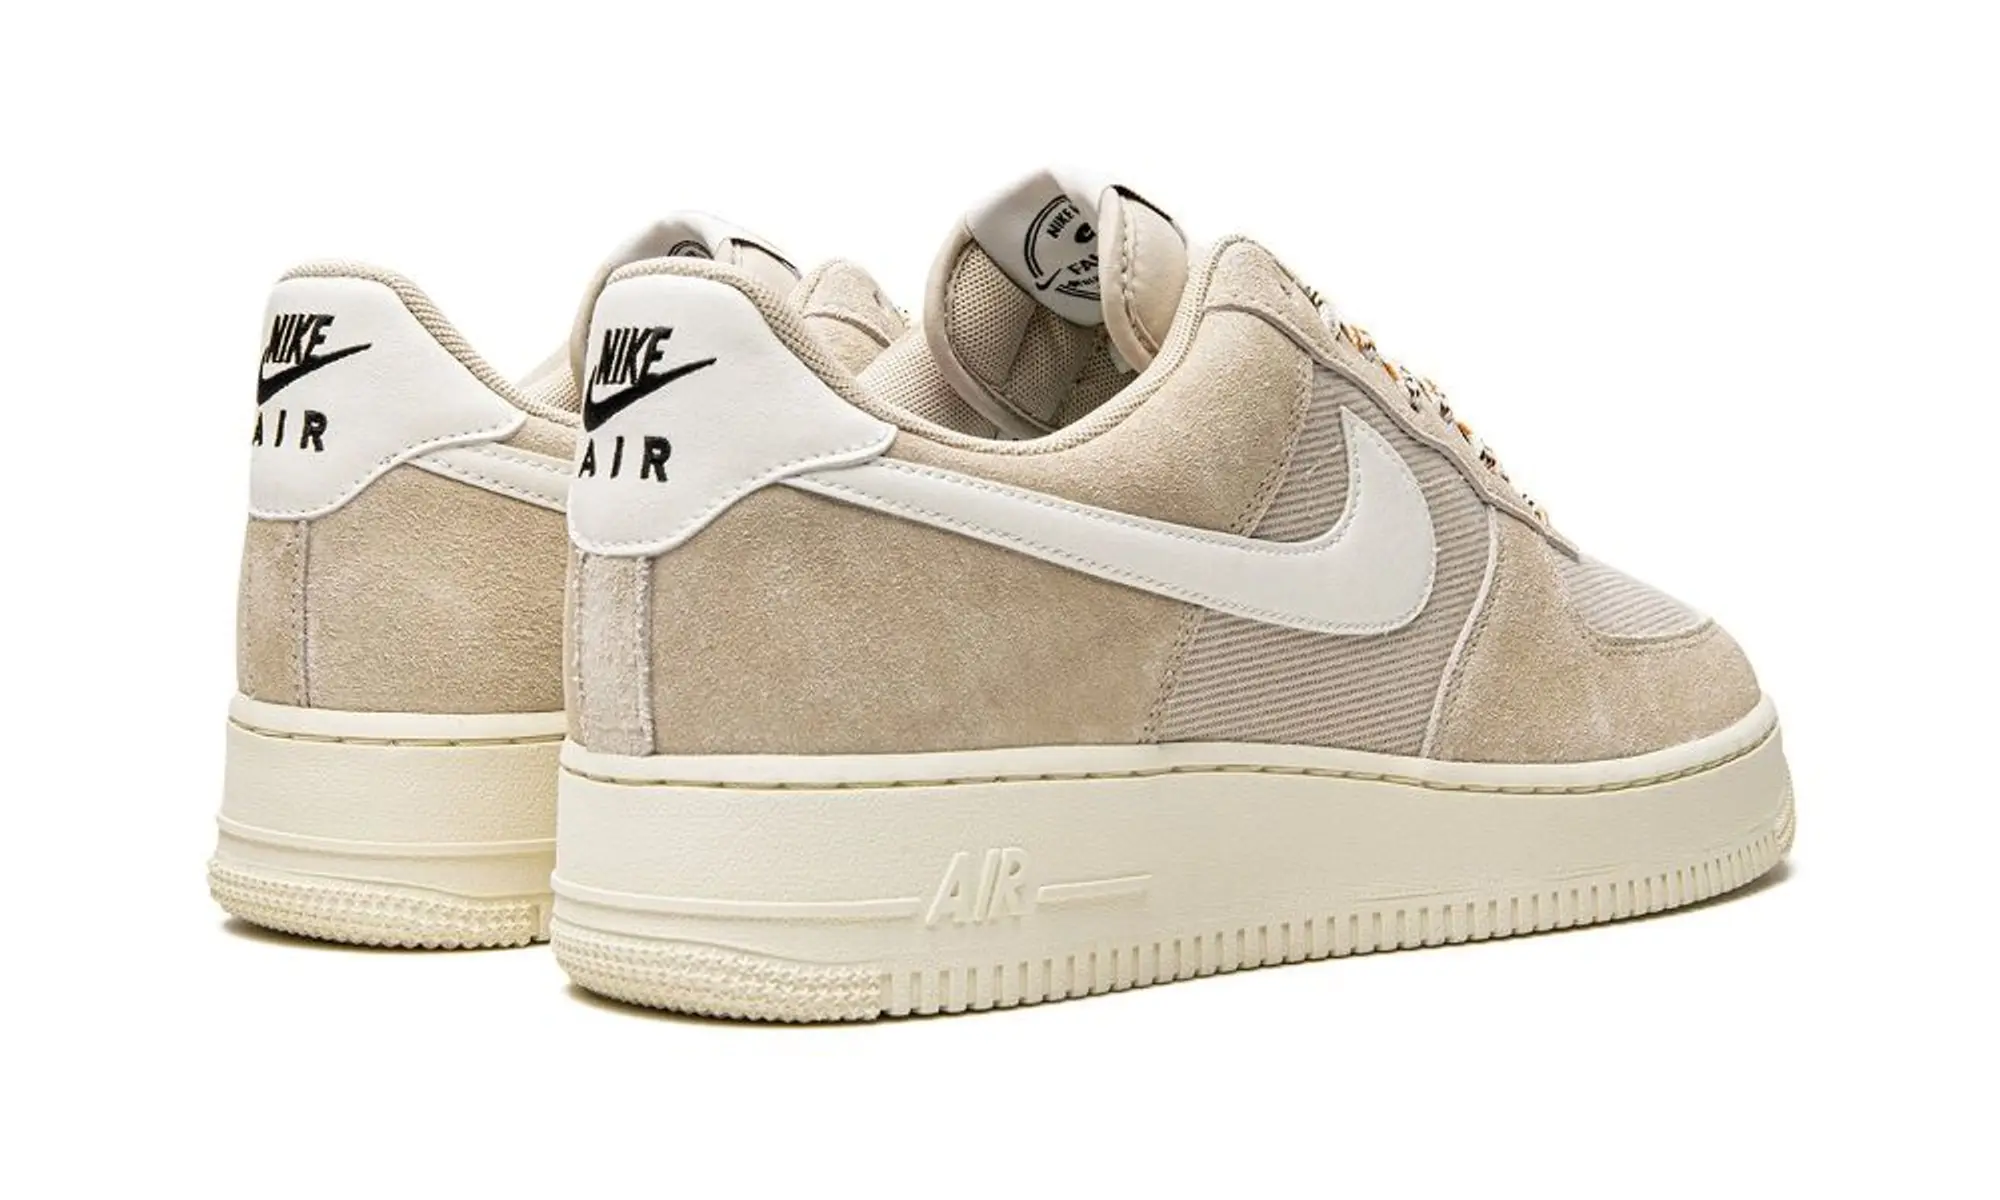 Nike Air Force 1 Certified Fresh Shoes